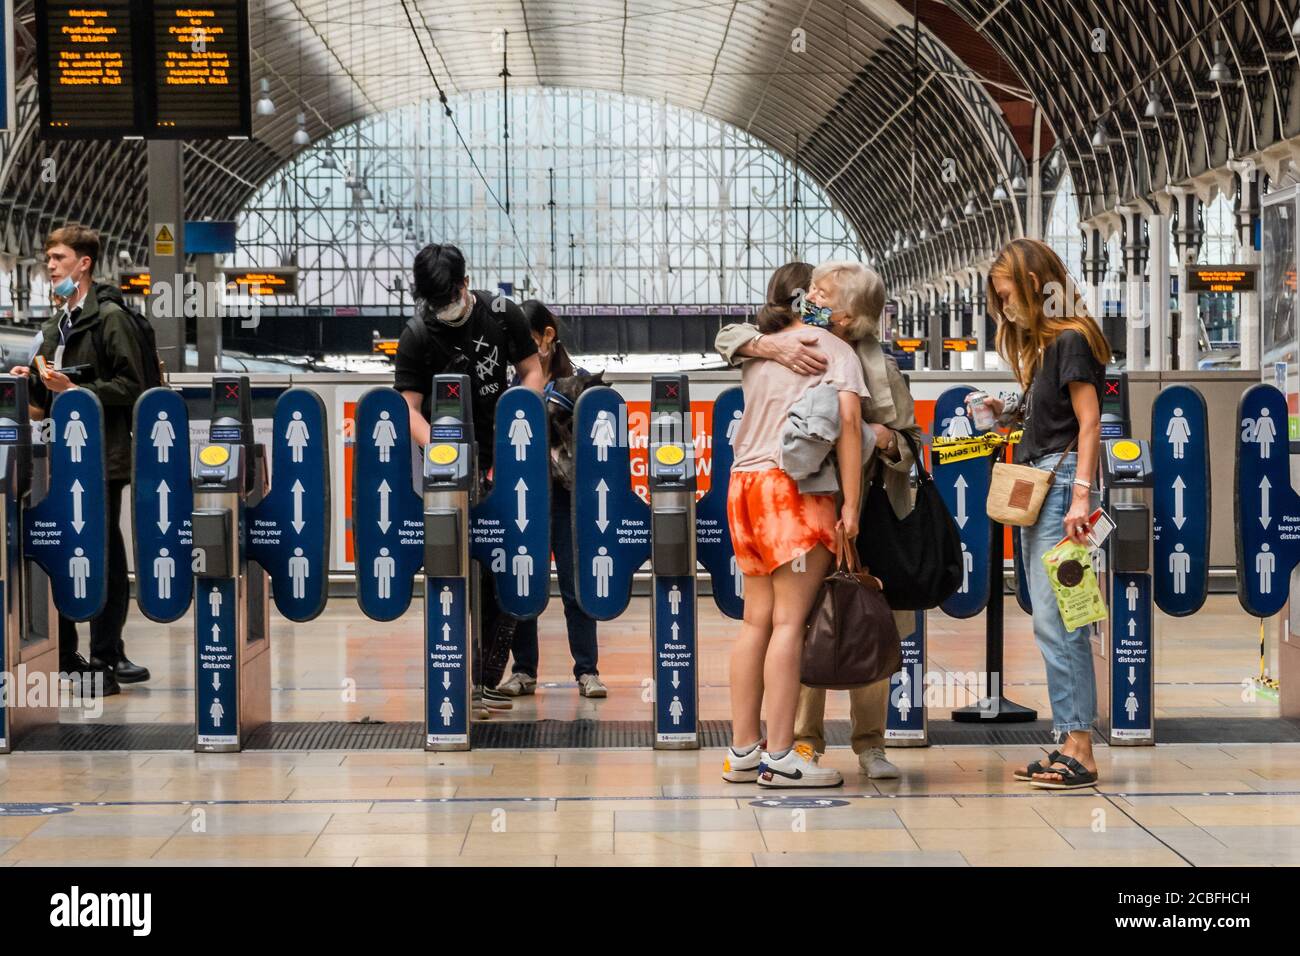 London, UK. 13th Aug, 2020. An old lady greets children with a hug - Paddington station remains relatively quiet - there are signs warning people to wear masks and not to maintain social distancing. The 'lockdown' continues for the Coronavirus (Covid 19) outbreak in London. Credit: Guy Bell/Alamy Live News Stock Photo